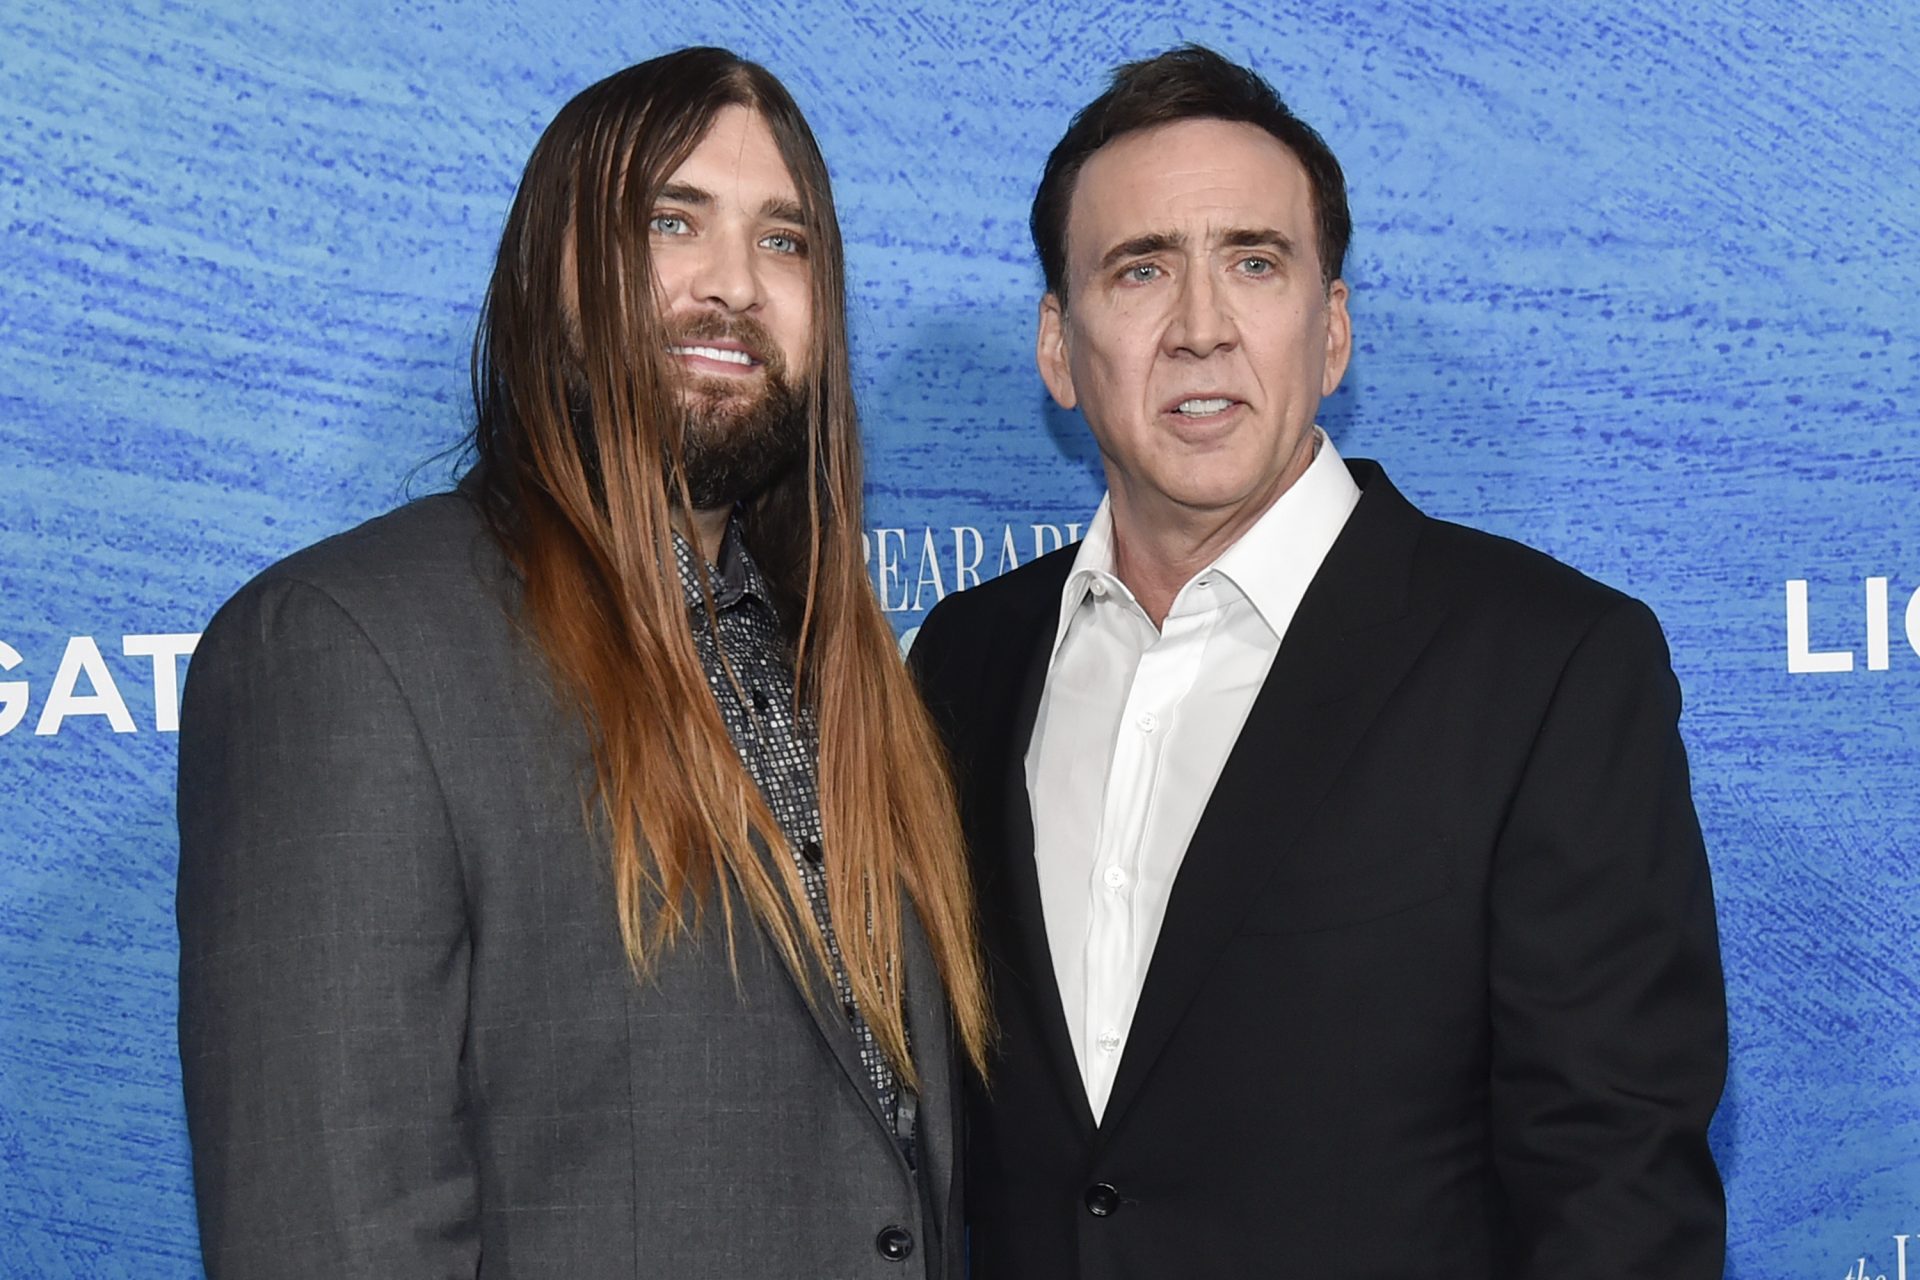 Nicolas Cage's son arrested on charges of assault with a deadly weapon